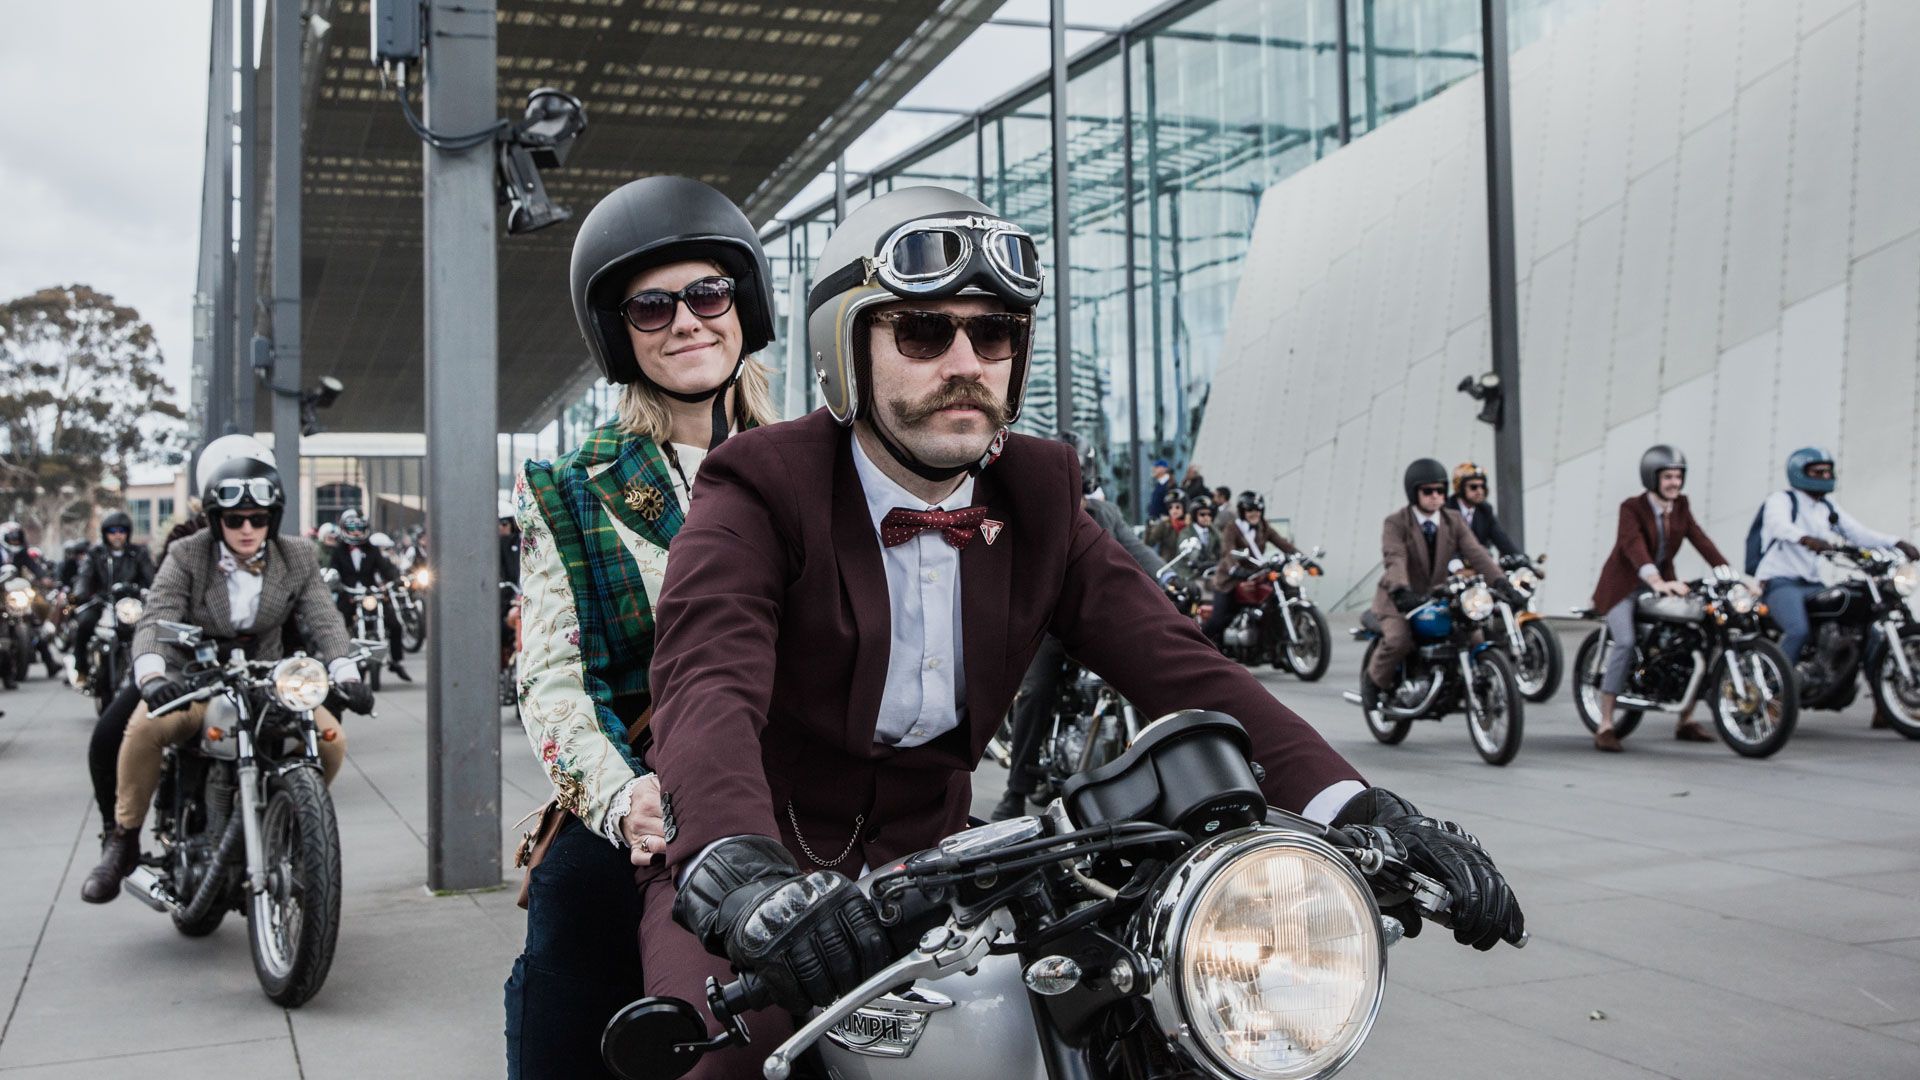 Man with moustache, dressed in suit, sits on motorbike, with female behind on the back of bike. Other motorbike riders stand around them on their bikes. 